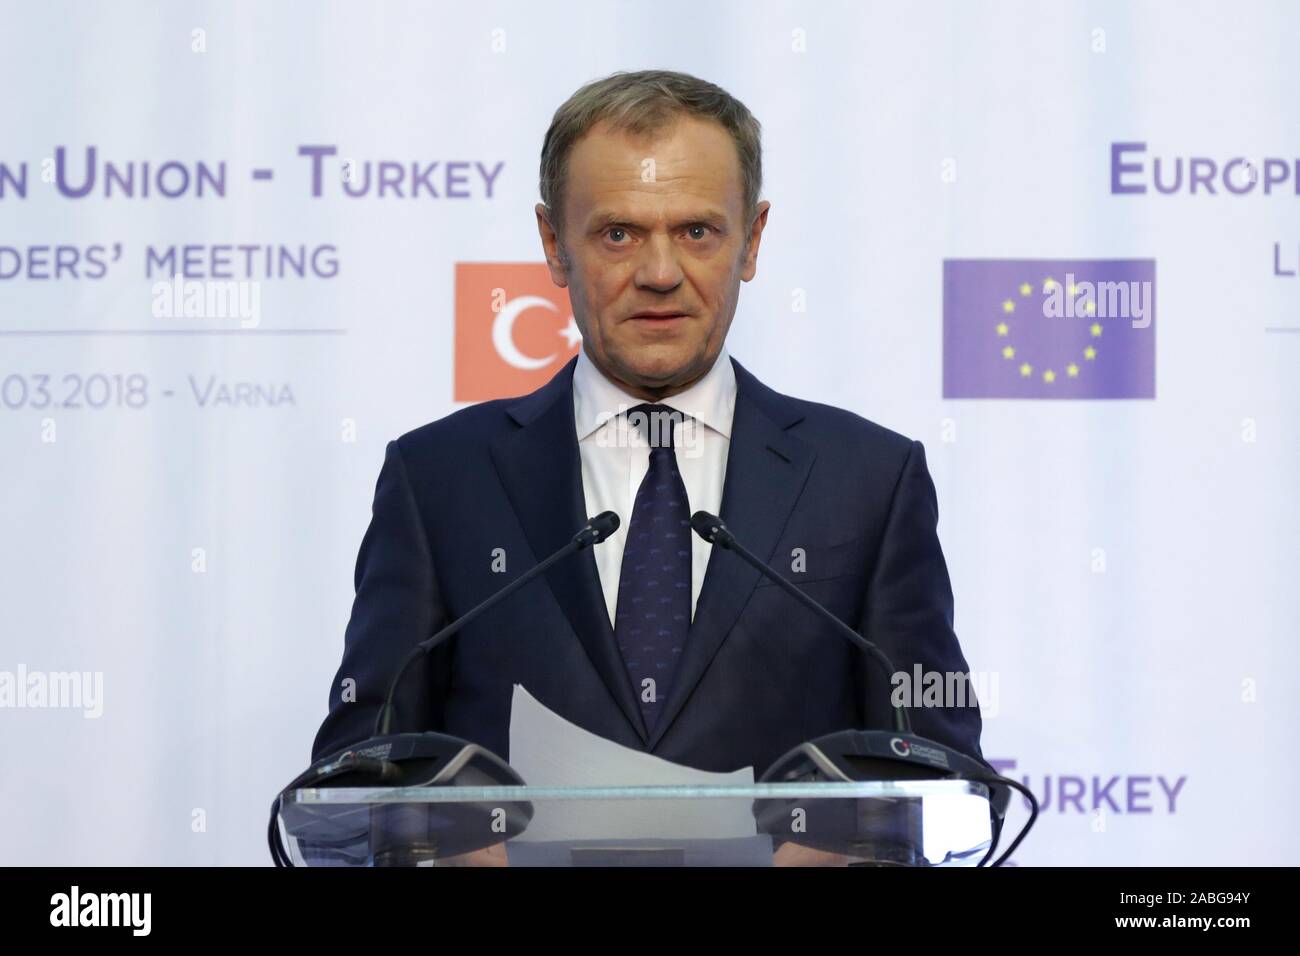 Varna, Bulgaria - March 26, 2018: European Council President Donald Tusk attends a news conference at Euxinograd residence. Stock Photo